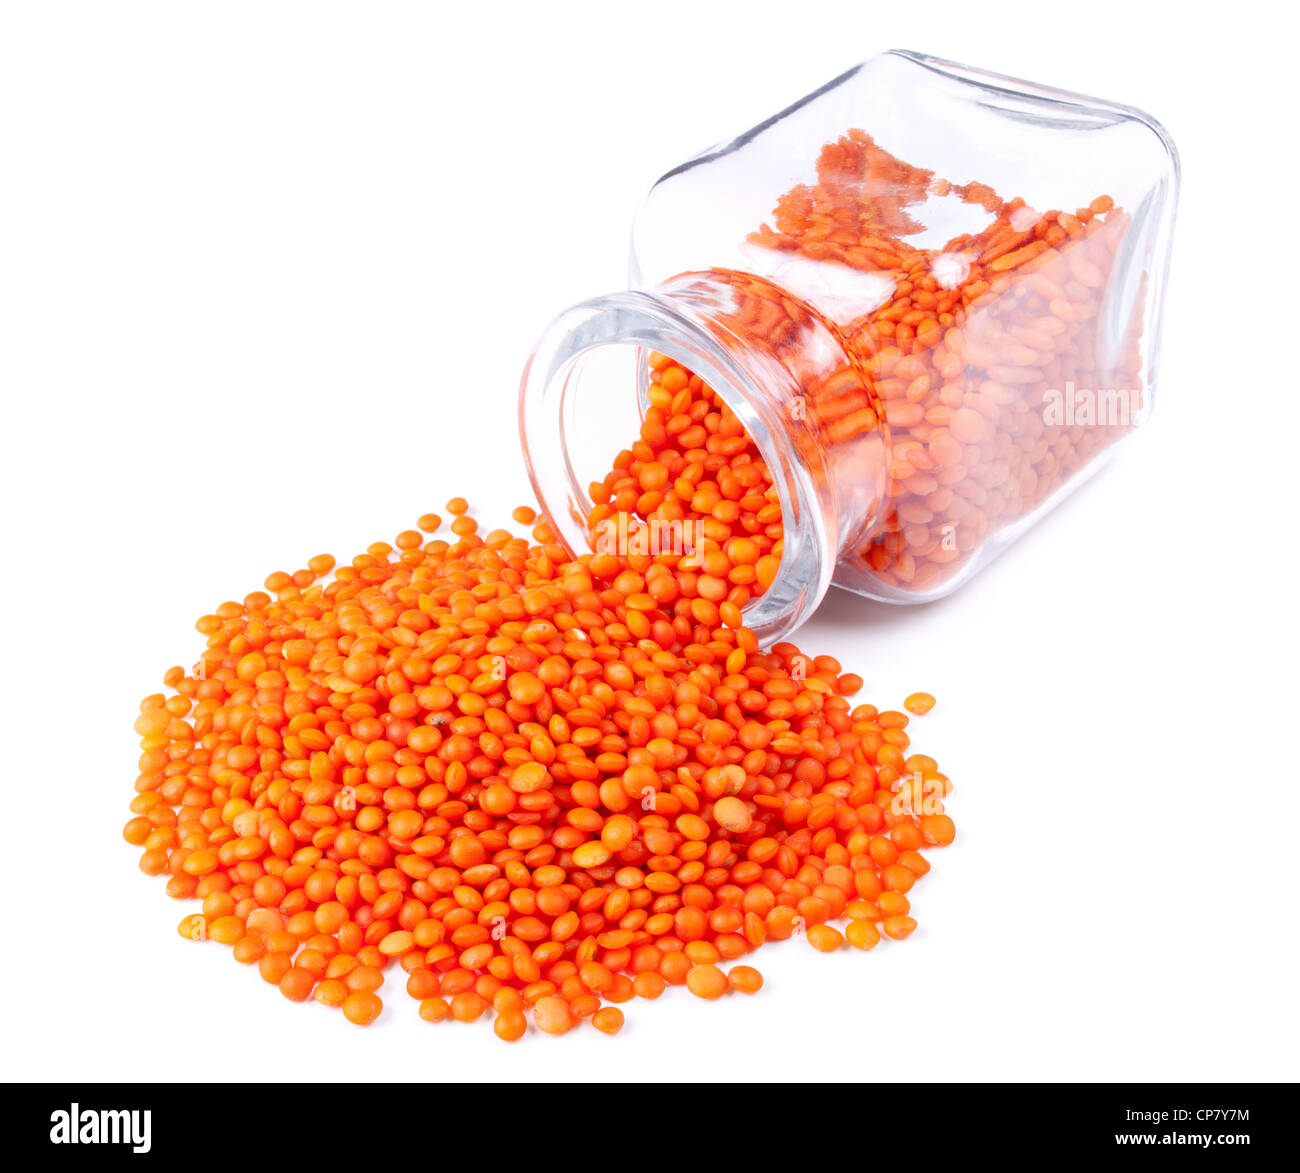 red lentils scattered on a white background from glass jar Stock Photo